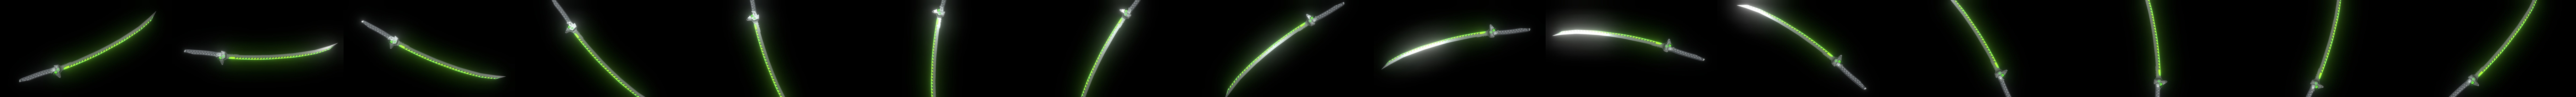 Overwatch Young Genji Dragonblade Sword And Sheath Assembly | 3D Print Model